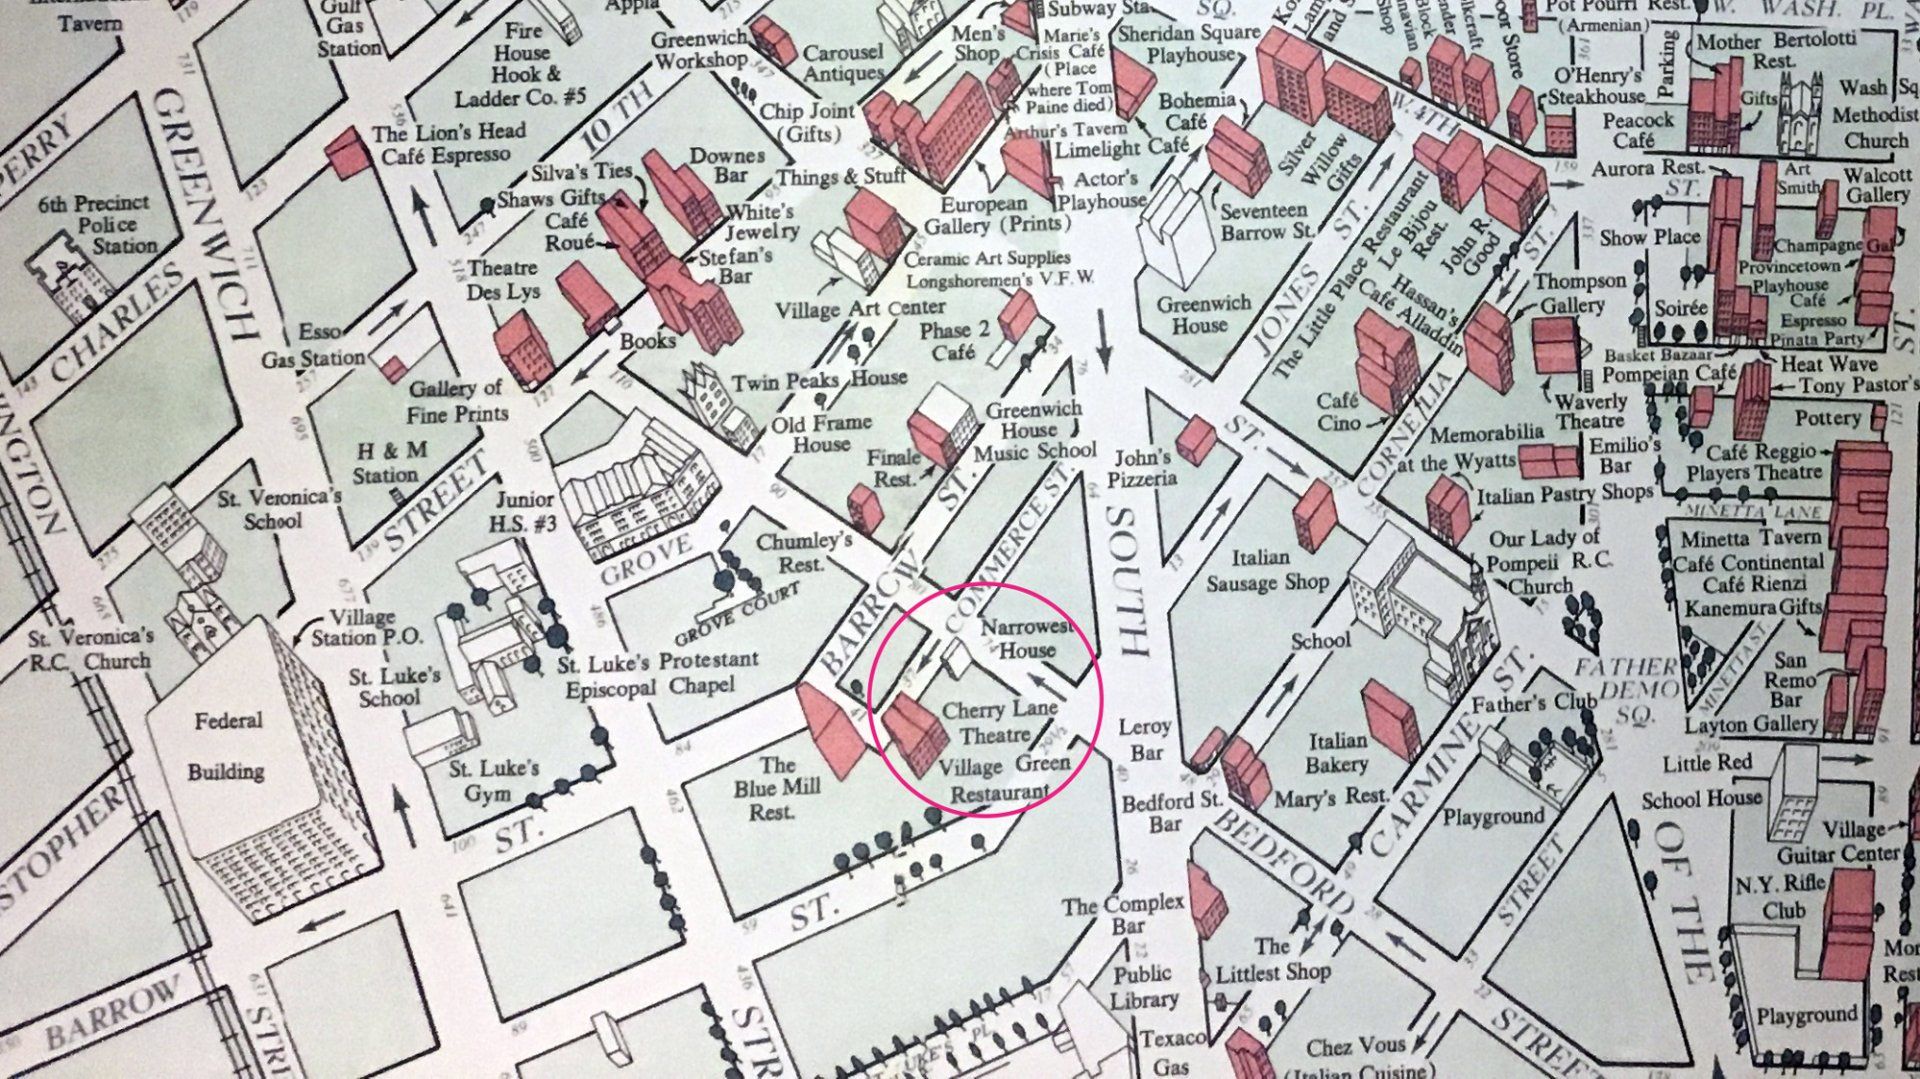 1960s map of Greenwich Village, NY, showing the Cherry Lane Theatre on Commerce Street.